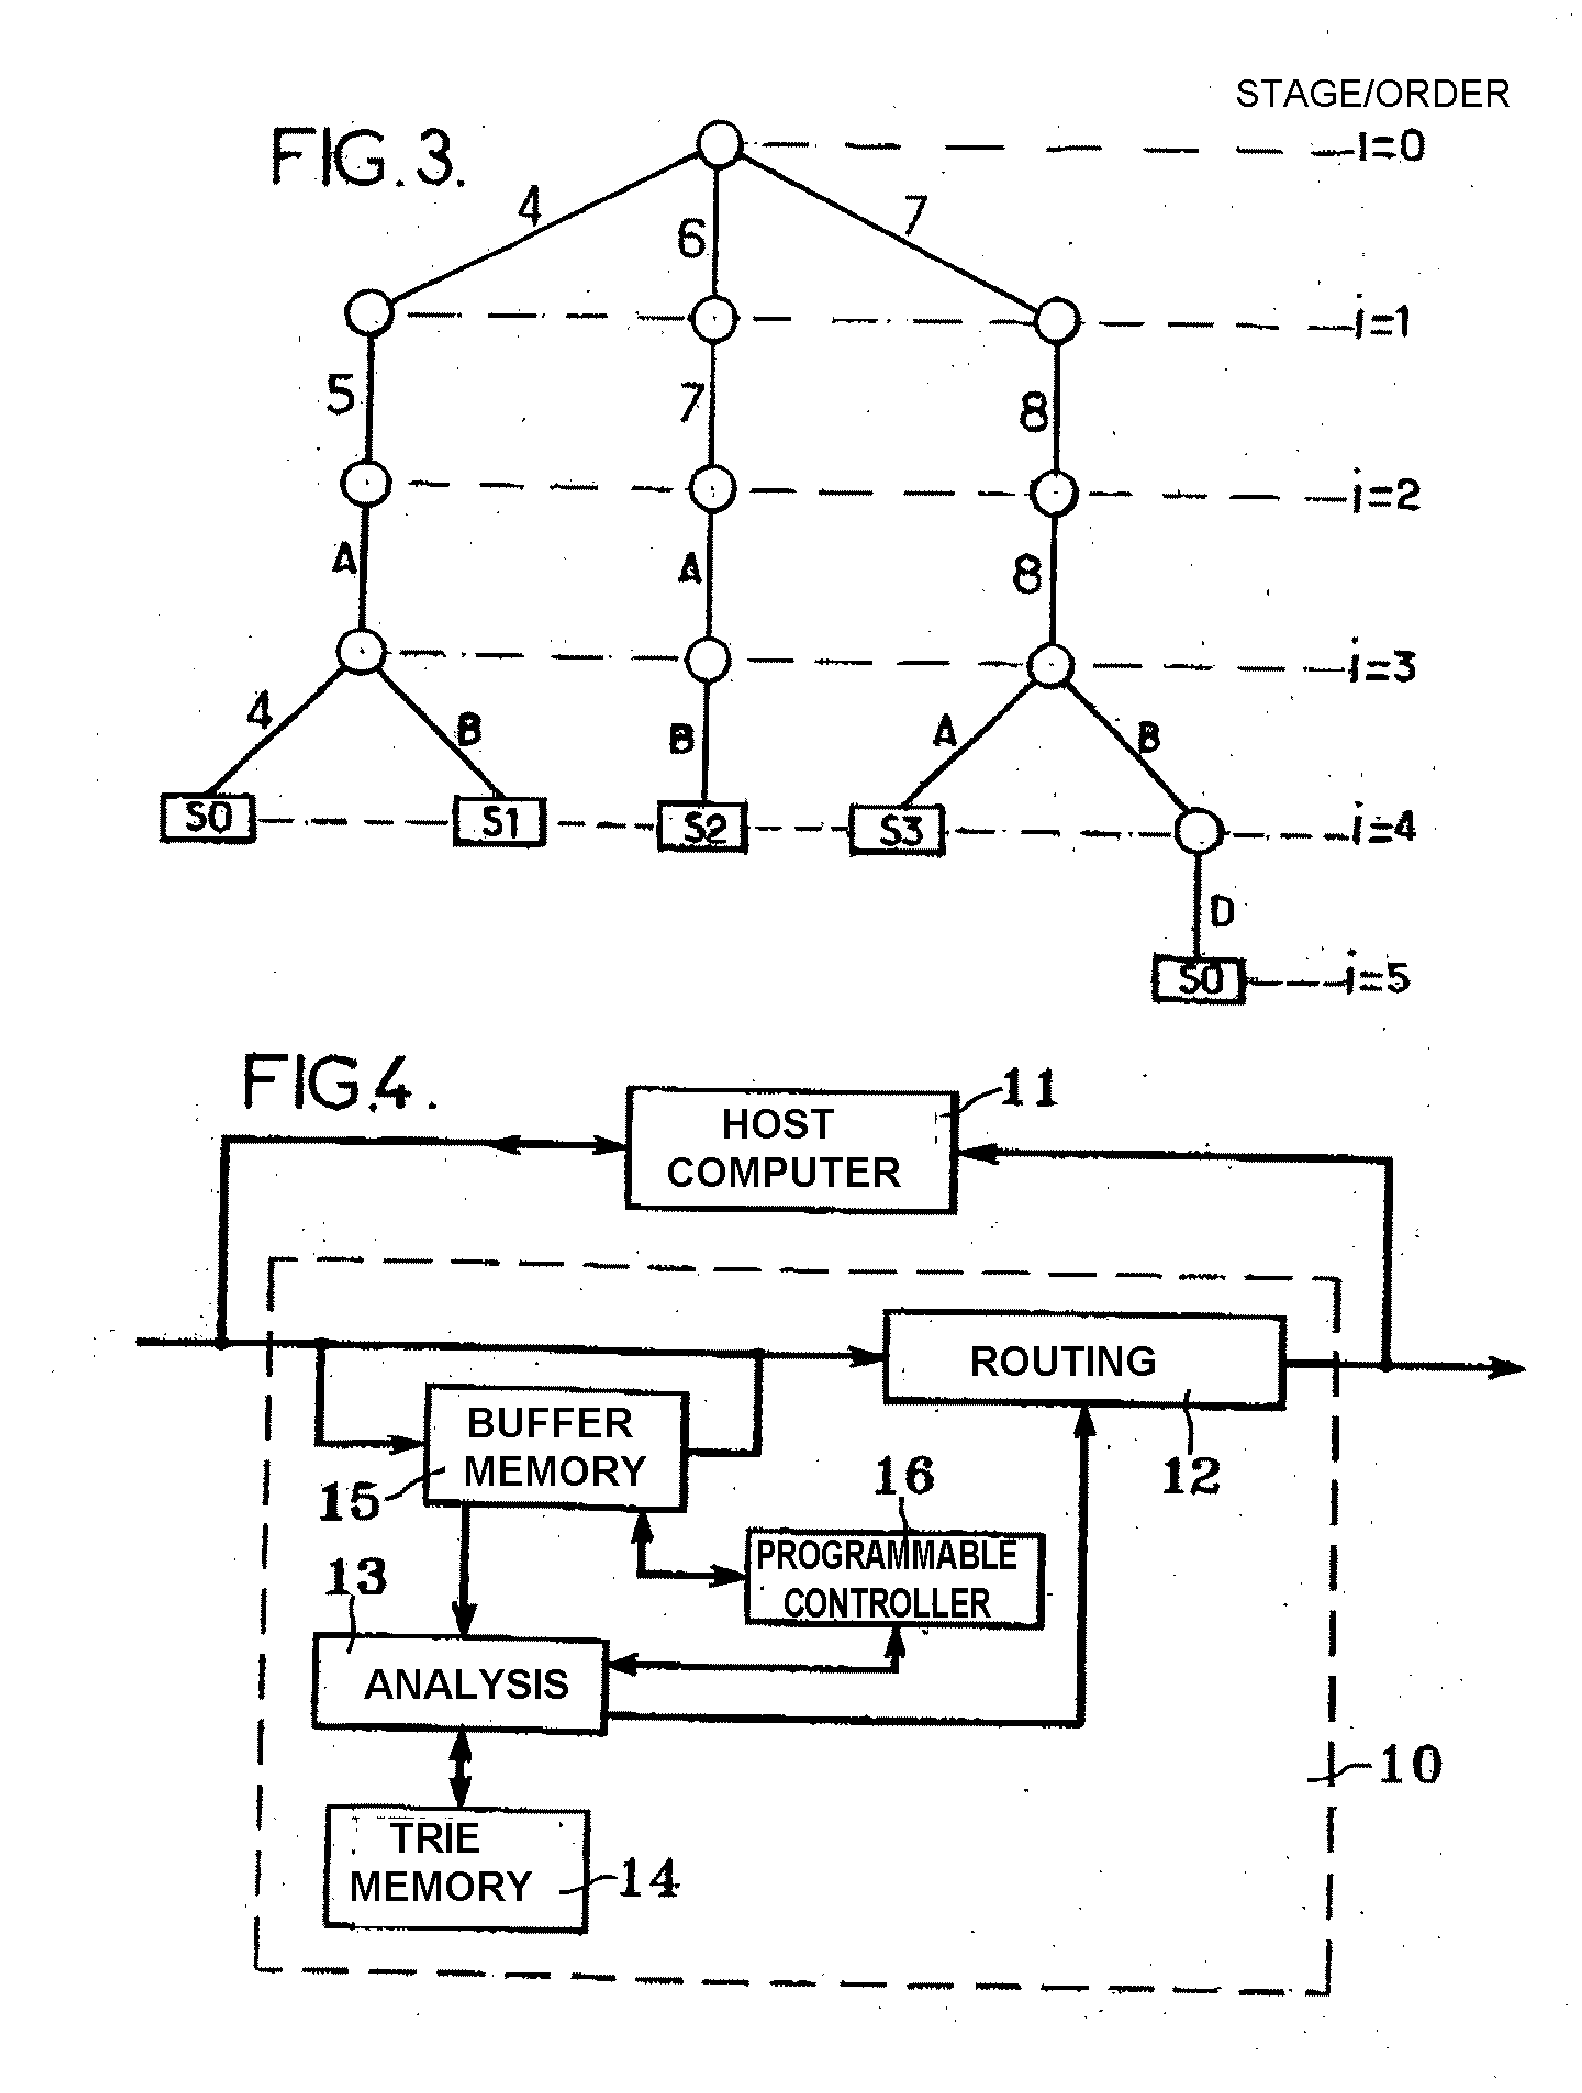 Trie-Type Memory Device With a Compression Mechanism